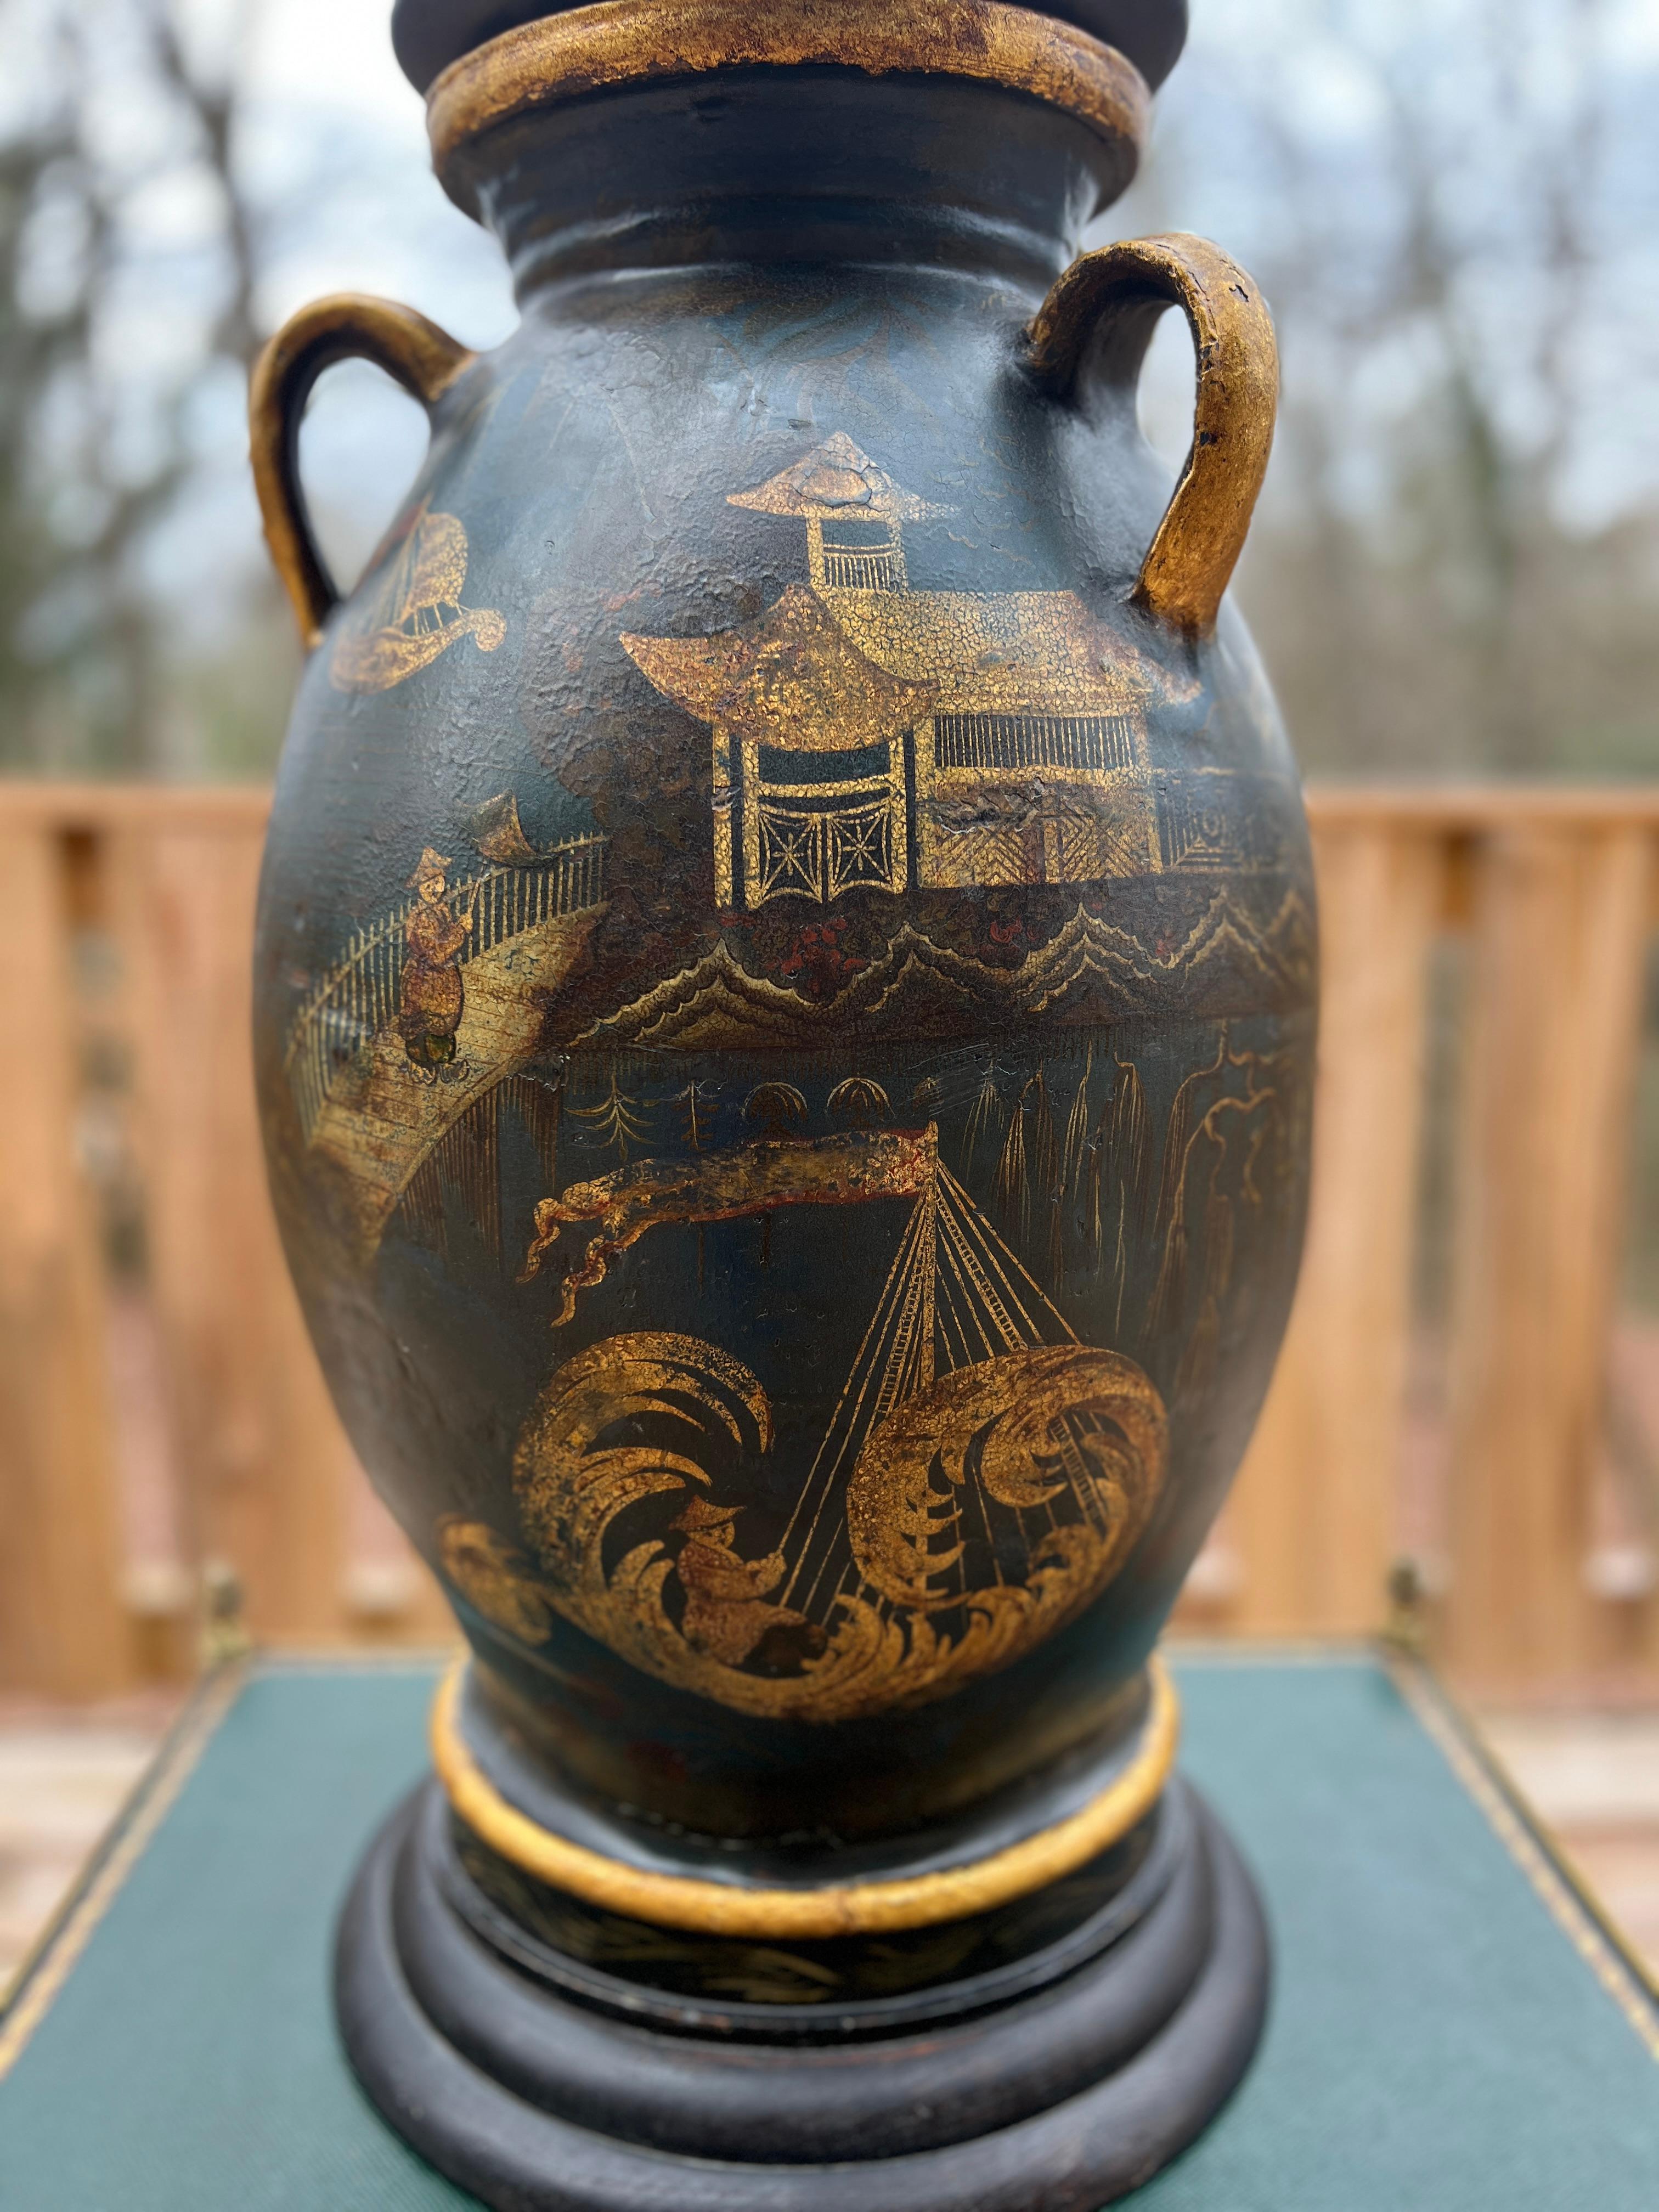 English or French, Circa 1820.

Regency Chinoiserie Decorated Gilt Wood & Tole Pagoda Design Handled Urn or Centerpiece, crafted circa 1820. This exquisite piece stands as a testament to the opulence and sophistication synonymous with the